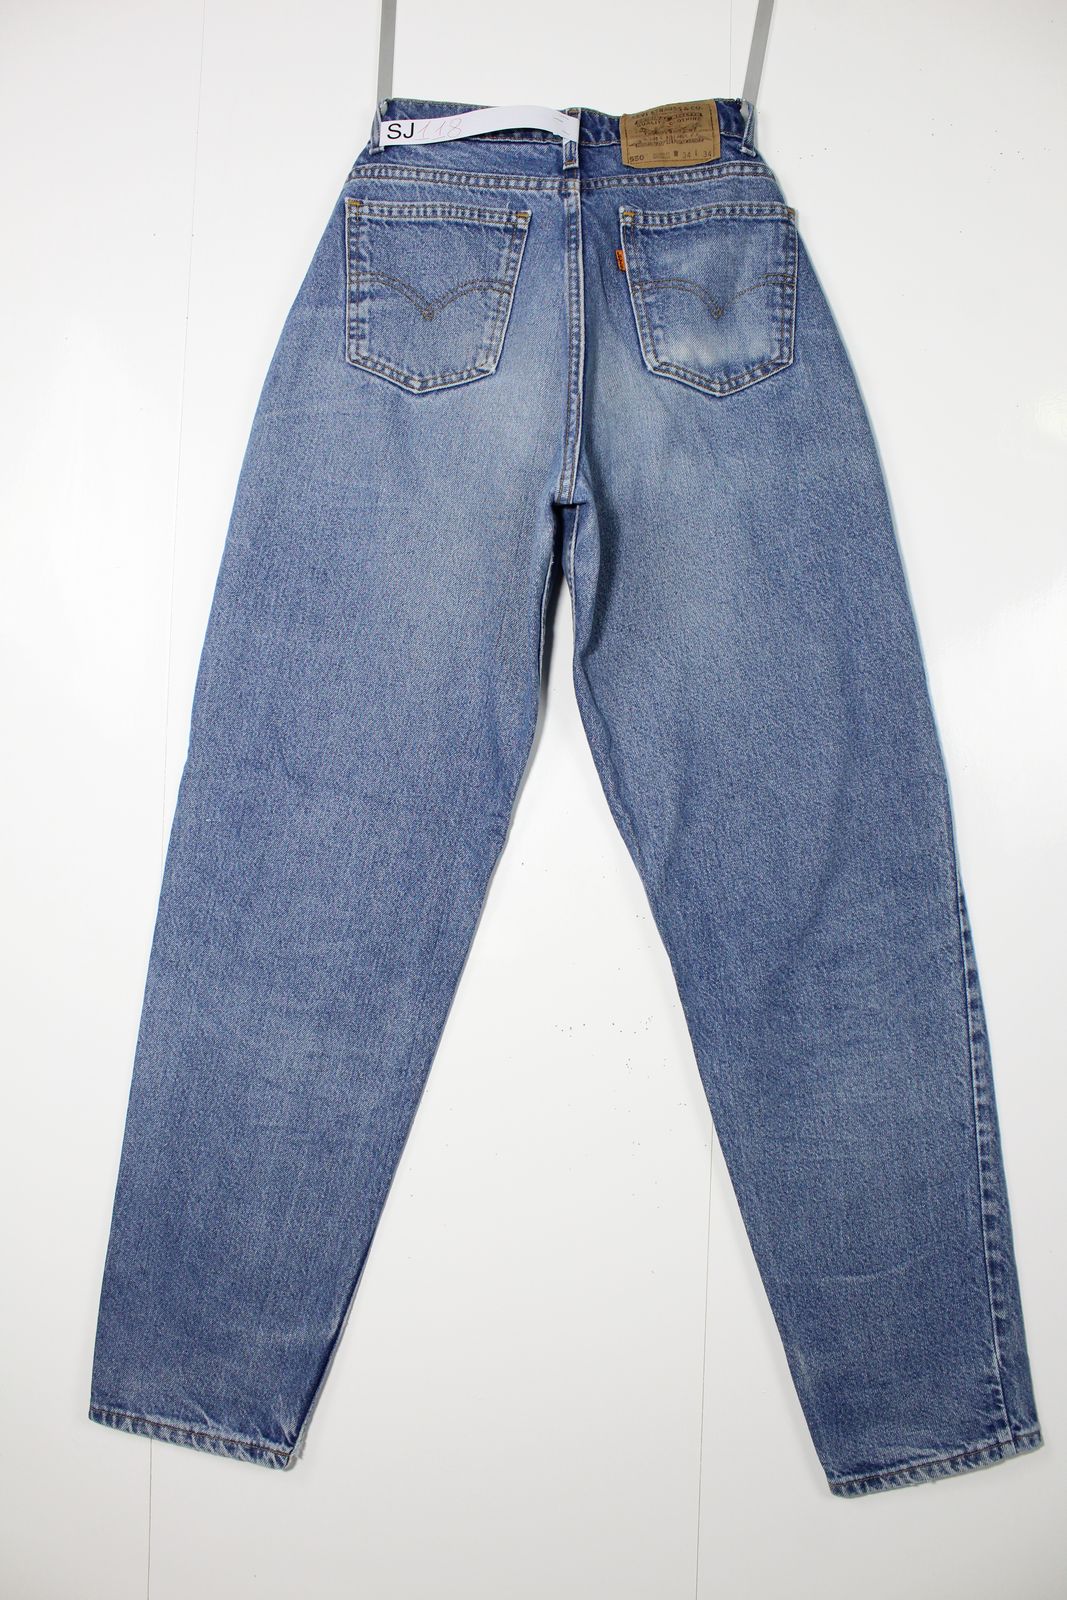 Levi's 550 Relaxed Fit Made In USA W34 L34 Jeans Vintage